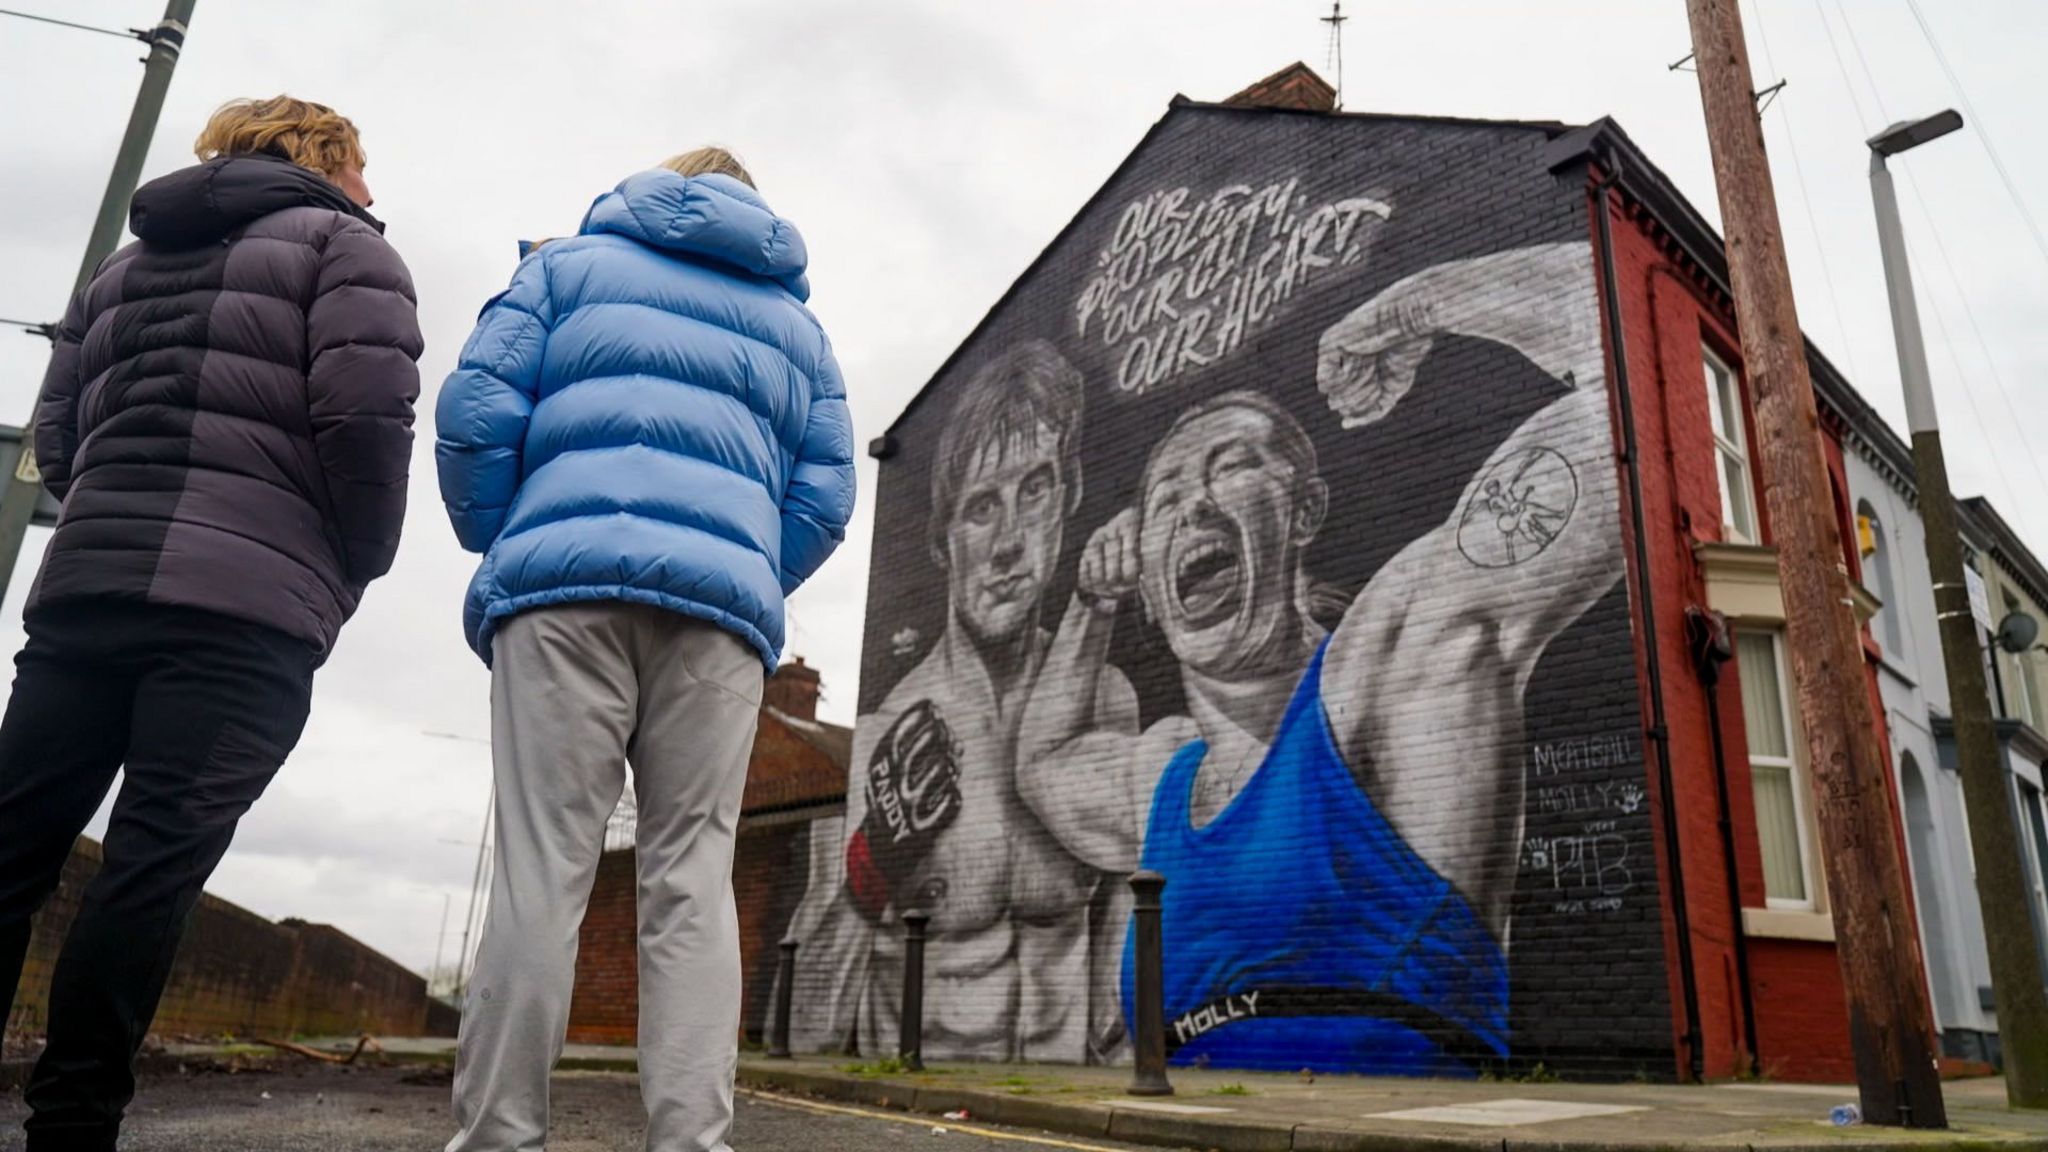 Molly McCann and Paddy Pimblett look at a mural in their honour.